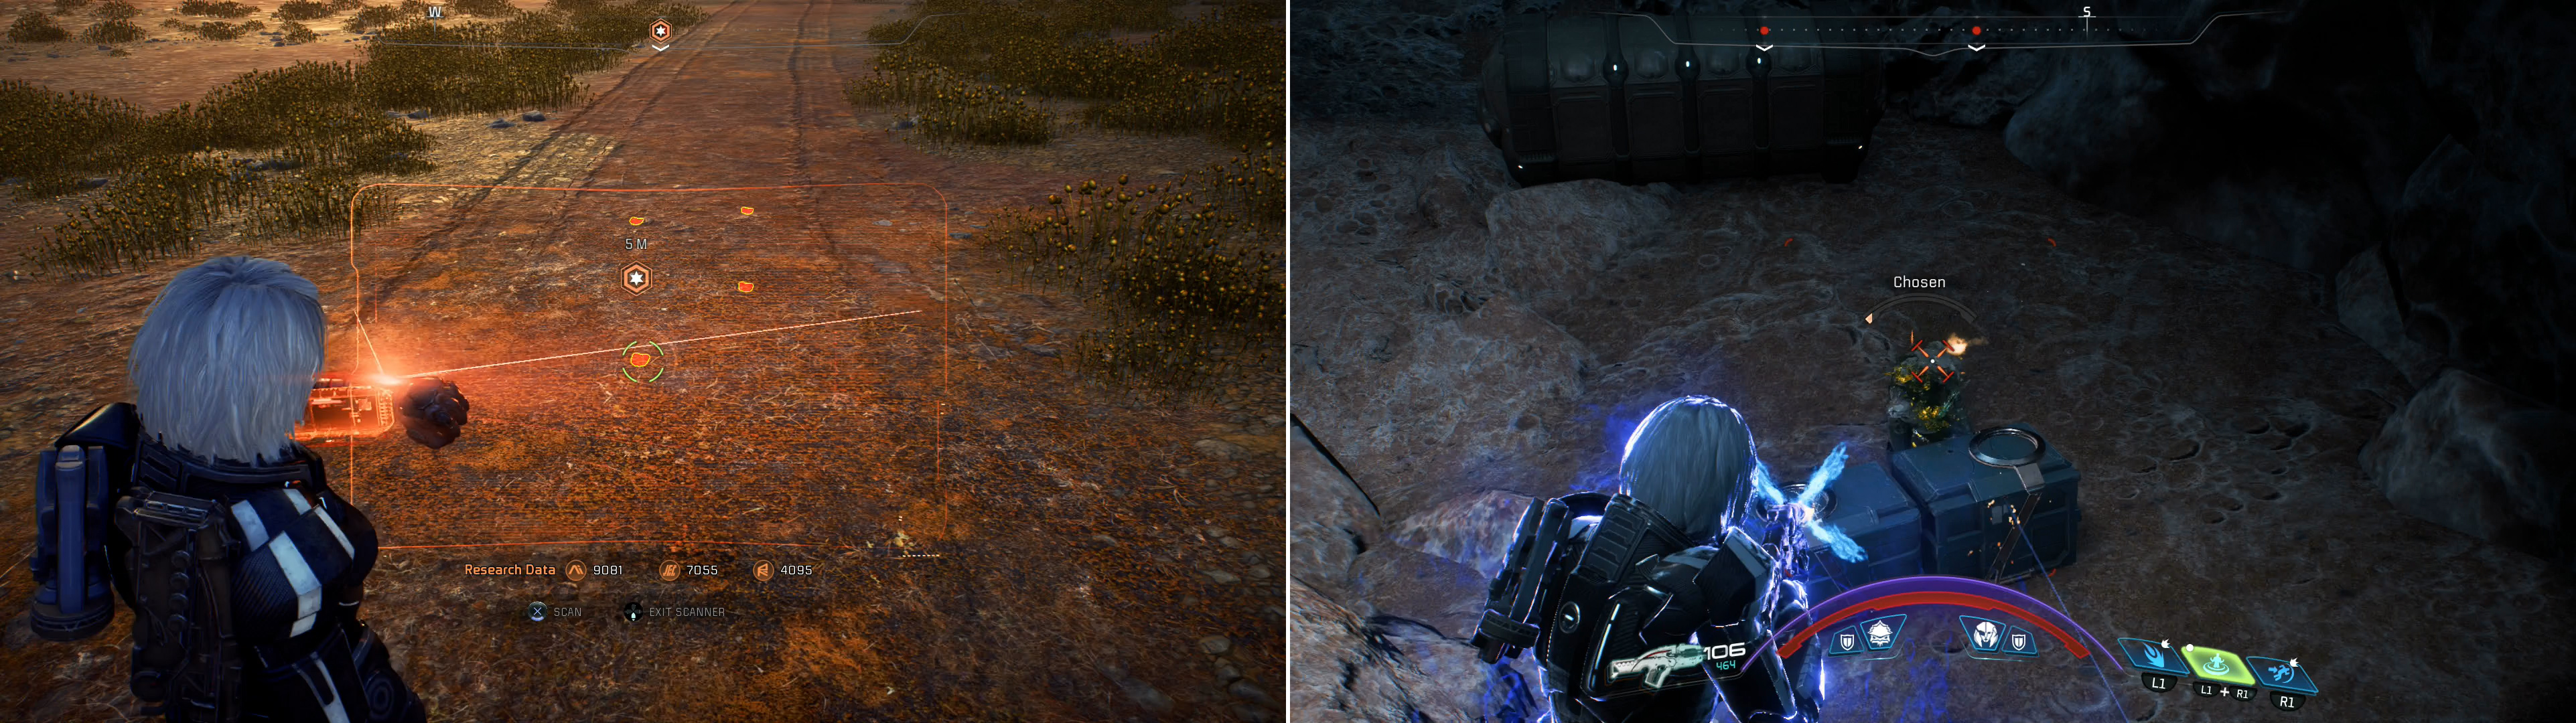 Scan and follow a series of tracks (left) to find a cave, inside which Kett dwell (right).